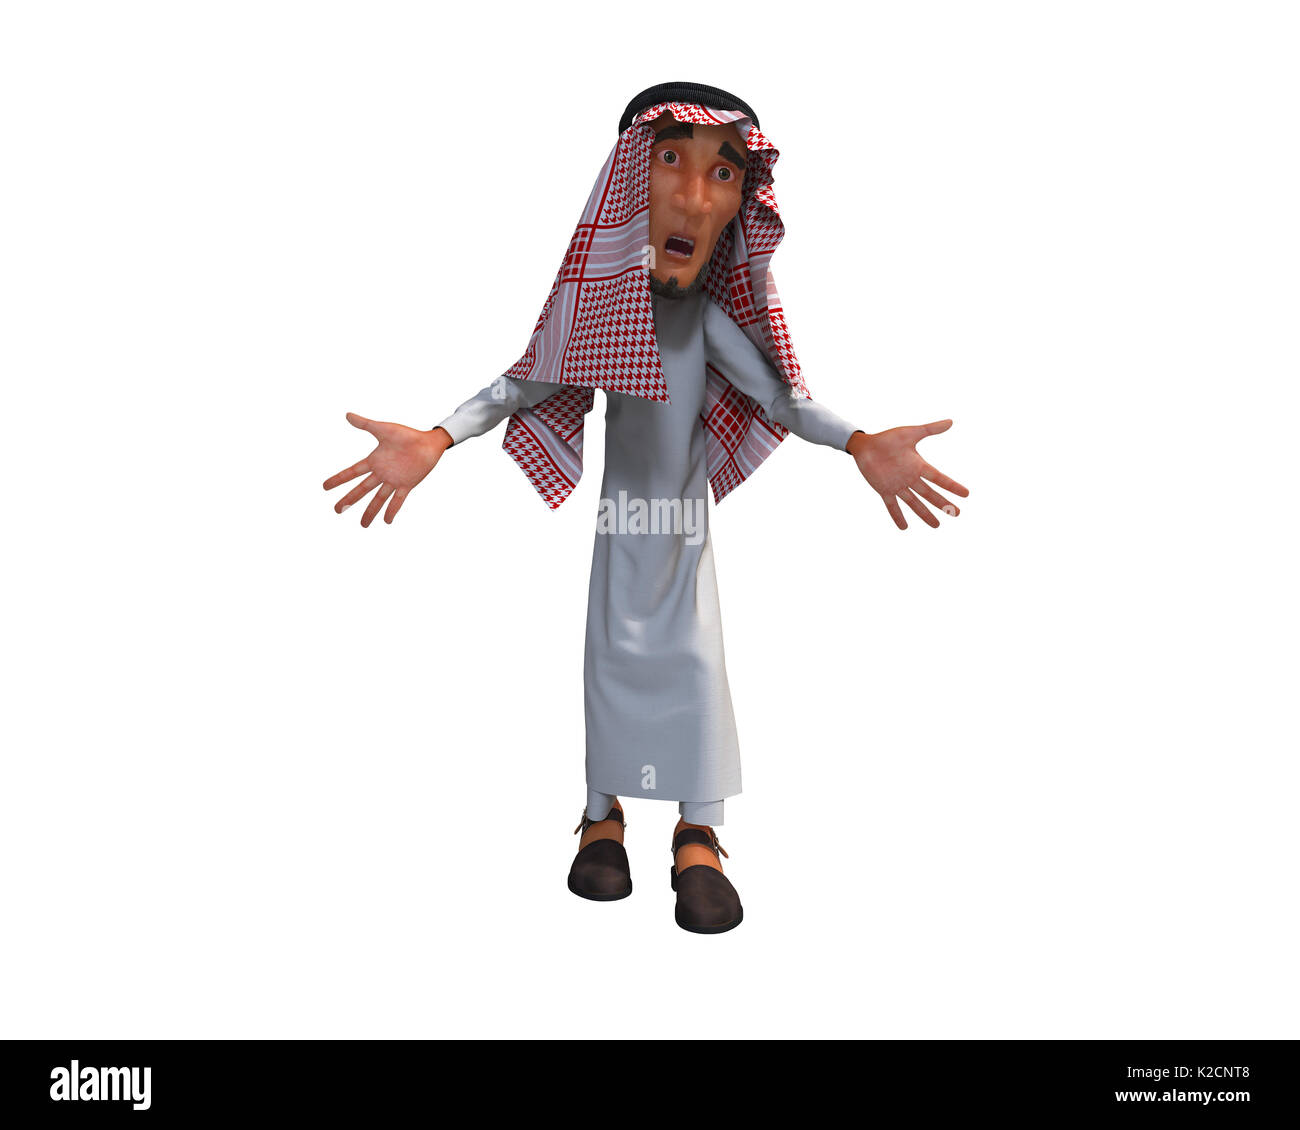 3d rendering of a Stylized Middle Eastern Man. Stock Photo